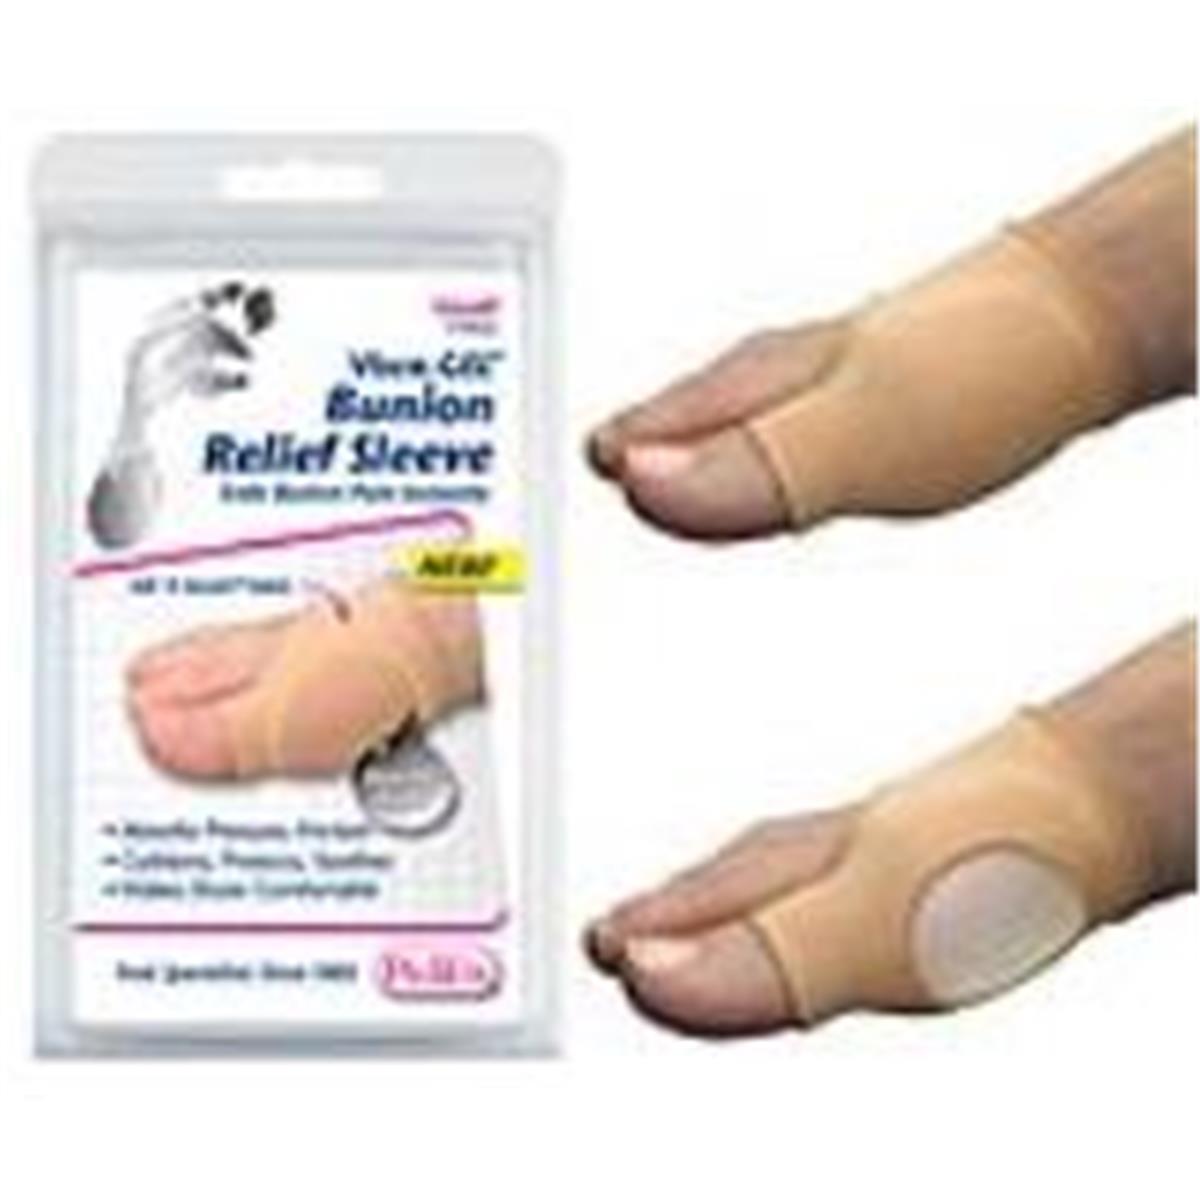 Completemedical P1303s Bunion Relief Sleeve, Small